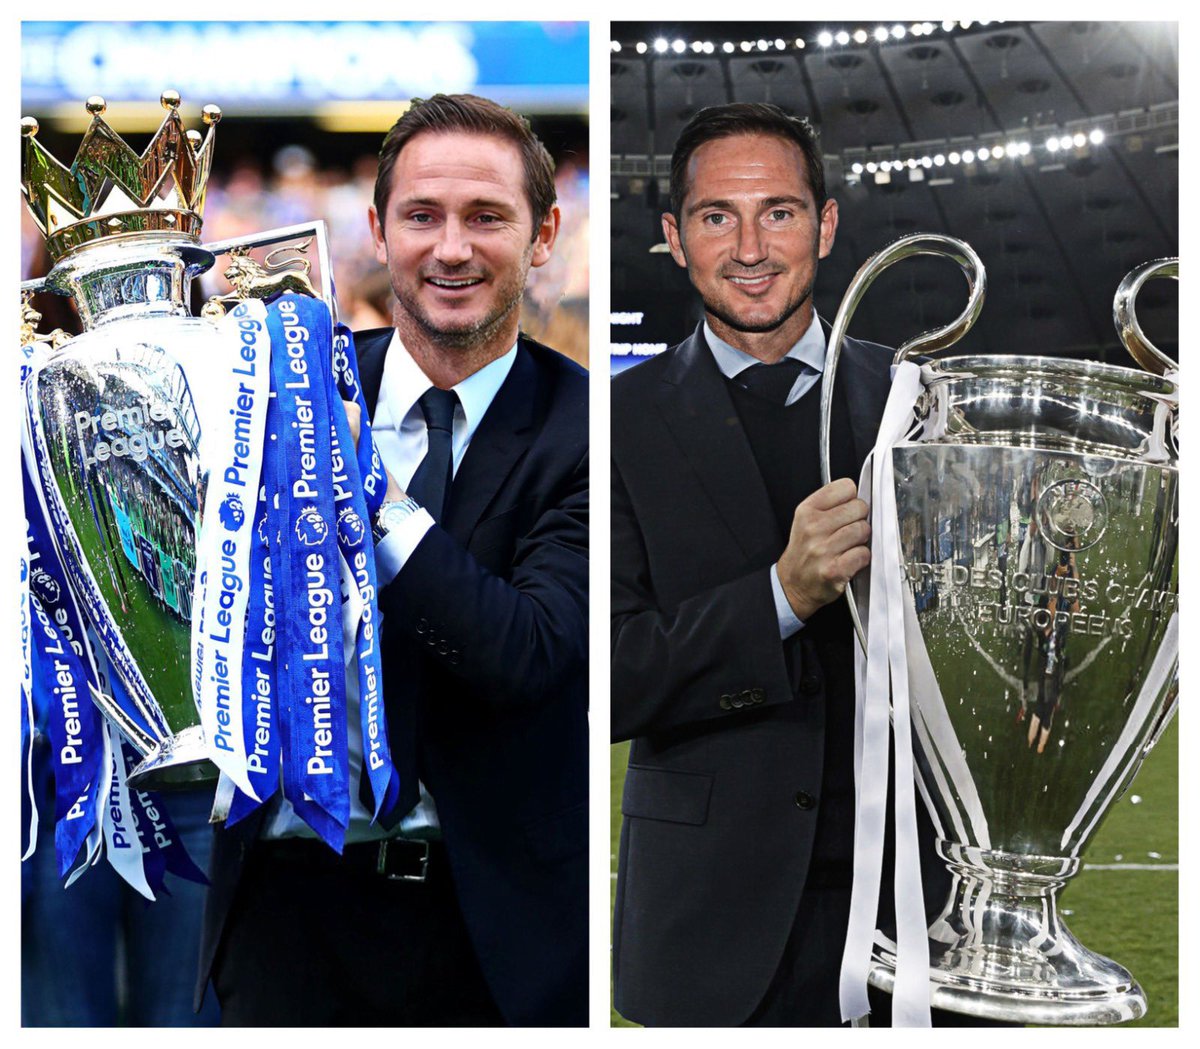 it didn’t work out, and us moving on to a better manager was the right call. Nobody is bigger than the club no matter what, and our club’s standards are massive. Frank has great potential though and I do hope that one day in the future he comes back and finishes what he started.